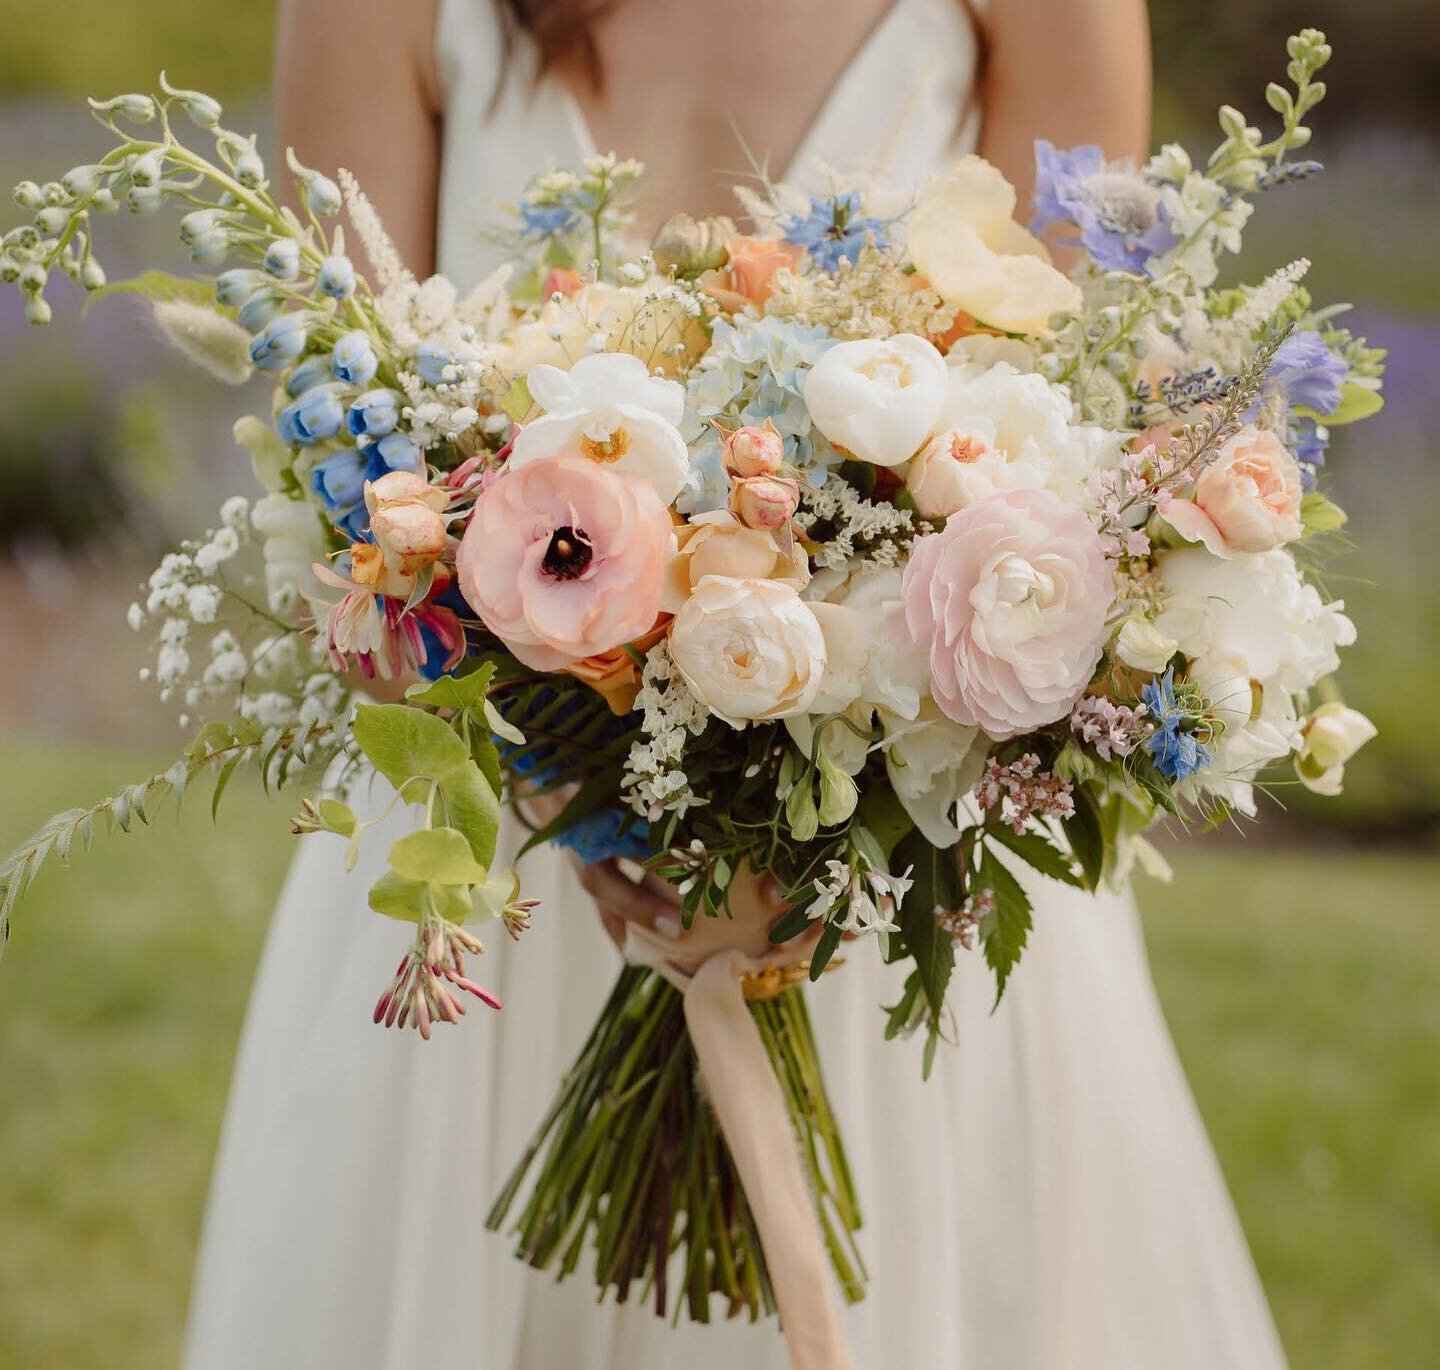 A moment for the florals! @mamabirdfarm did all the florals for A&amp;K&rsquo;s wedding and I can&rsquo;t get over this stunning bouquet. Scroll for more of her work! #weddingbouquet #weddingday #weddingdetails #saltwaterfarm